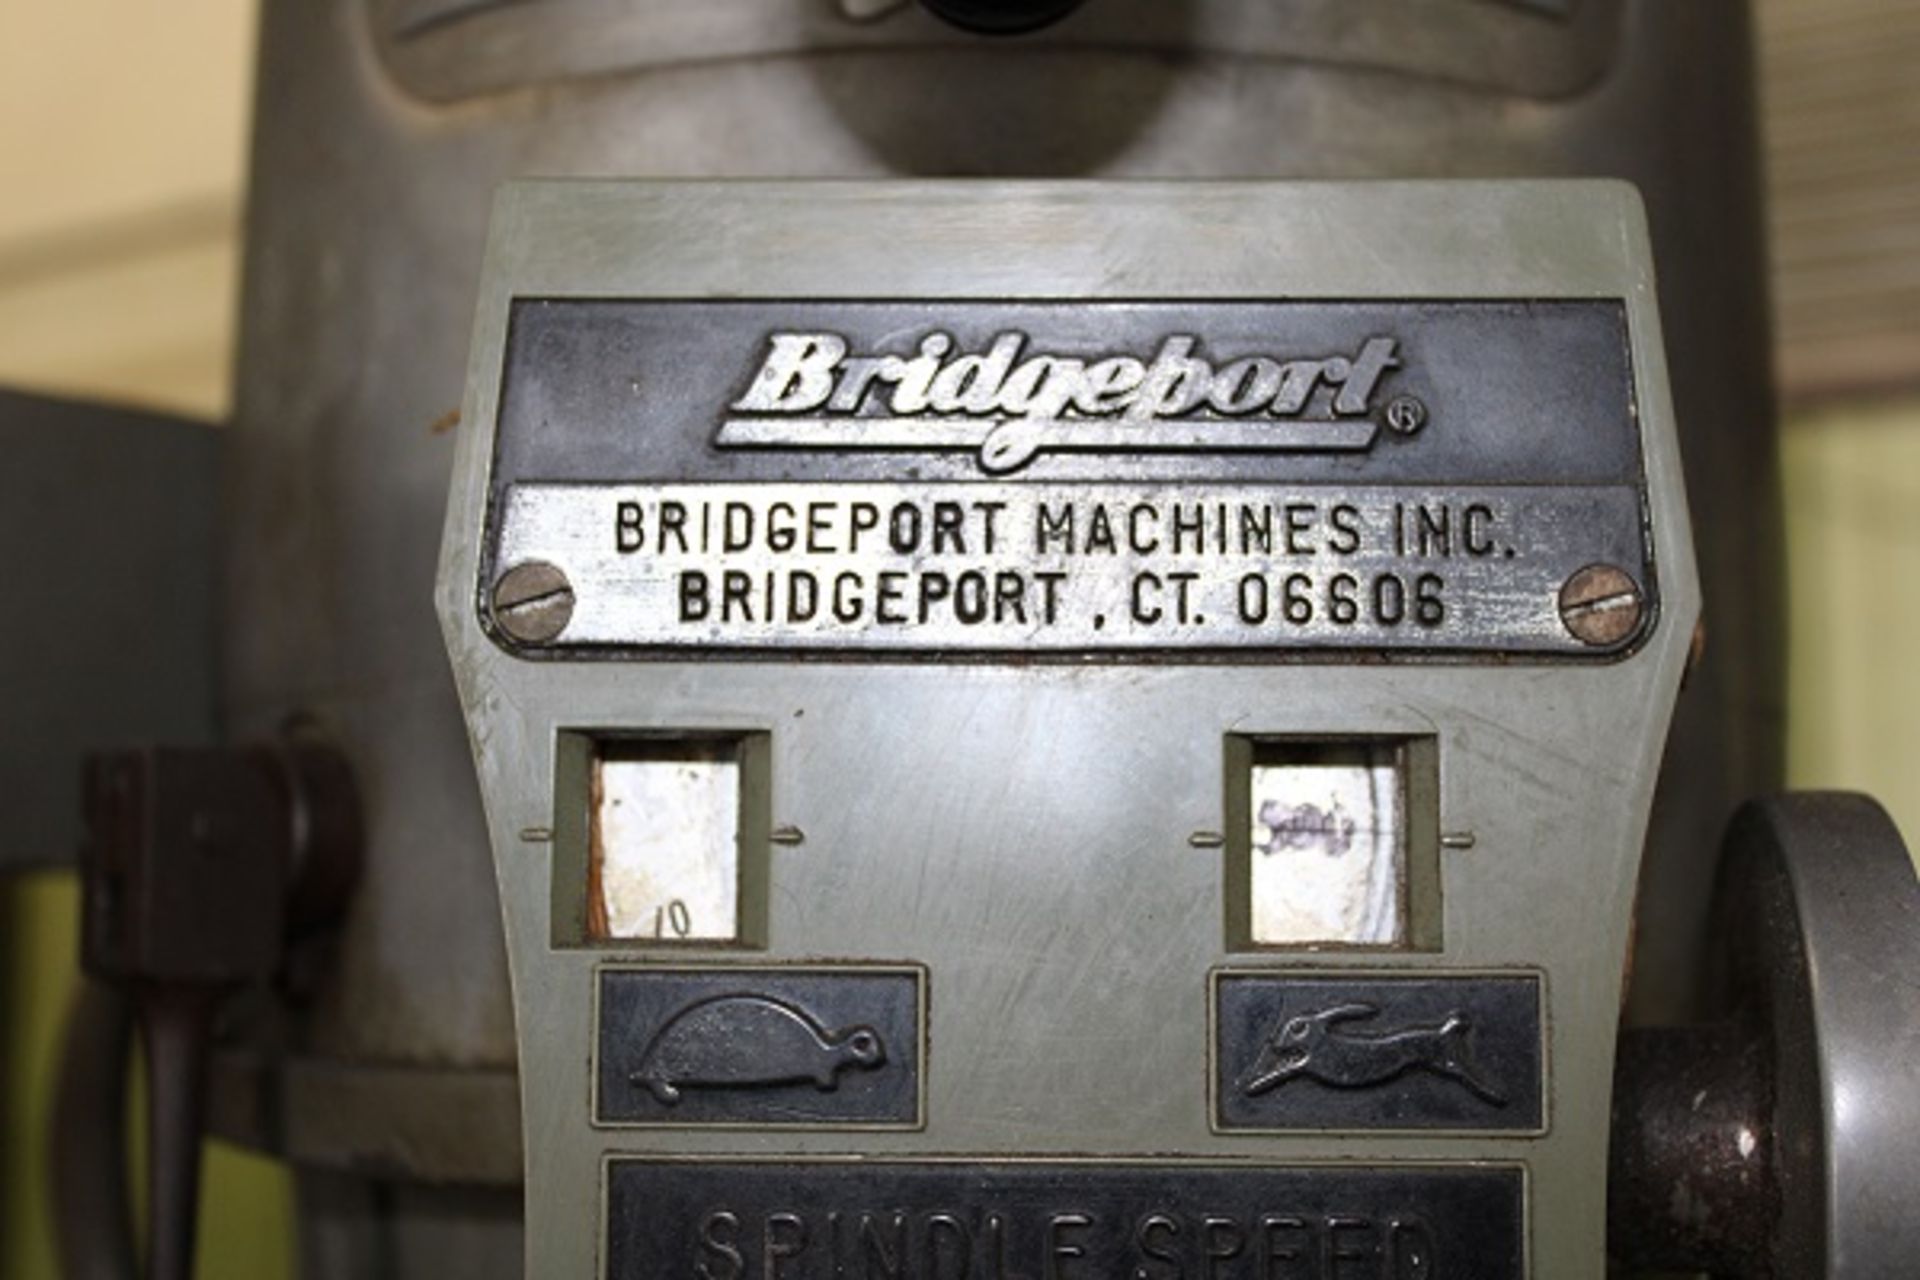 Bridgeport Vertical Mill w/ XY Axis and Bridgeport Easy Track Controls - Image 4 of 4